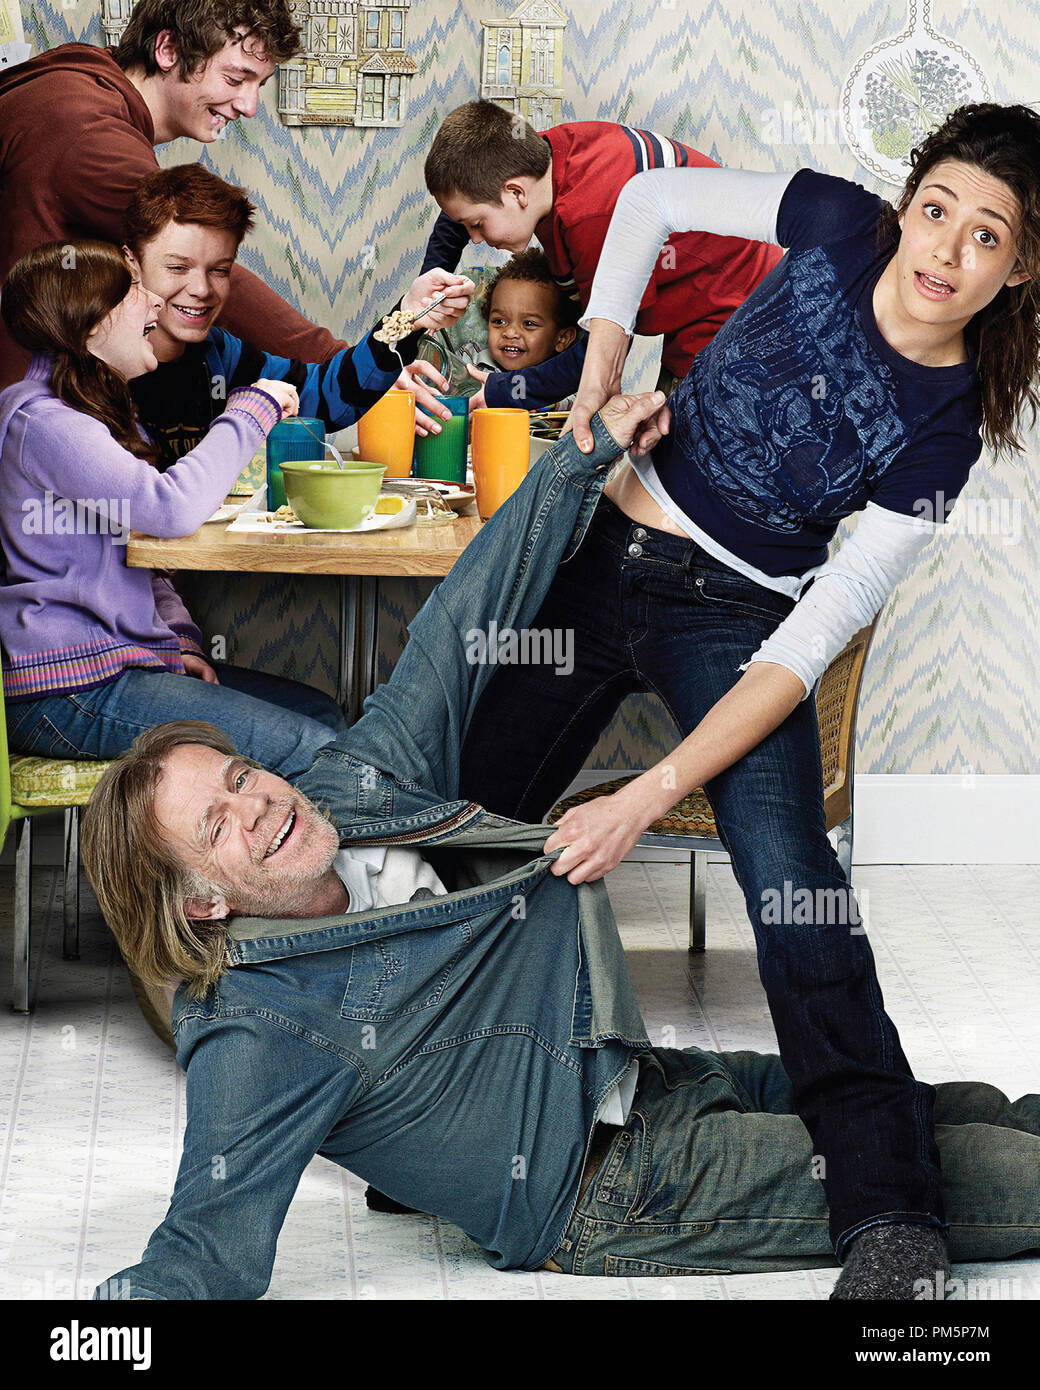 Emma Kenney as Debbie, Cameron Monaghan as Ian, Jeremy White as Lip, William H. Macy as Frank, Blake/Brennan Johnson as Liam, Ethan Cutkosky as Carl, and Emmy Rossum as Fiona - Photo: Courtesy of SHOWTIME Stock Photo